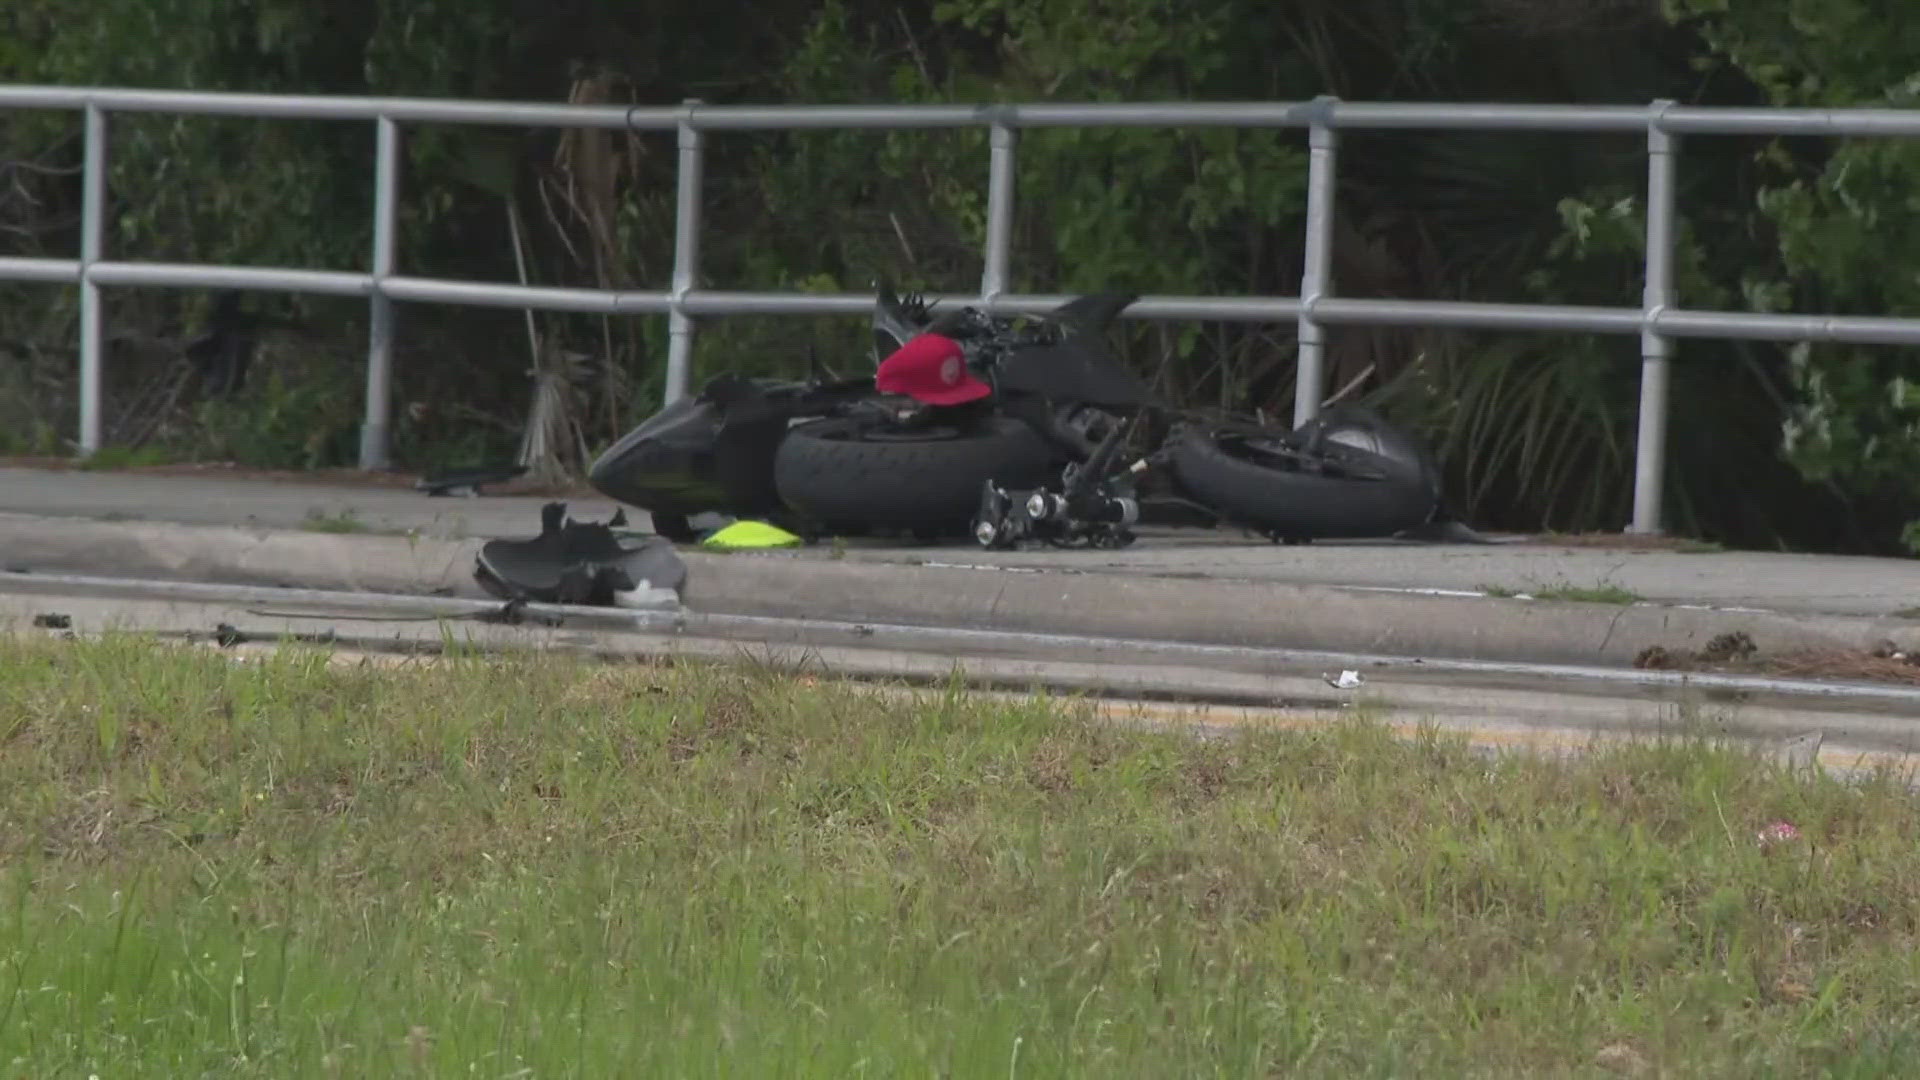 This incident marks the 59th traffic fatality in Duval County this year, and the 8th involving a motorcyclist.